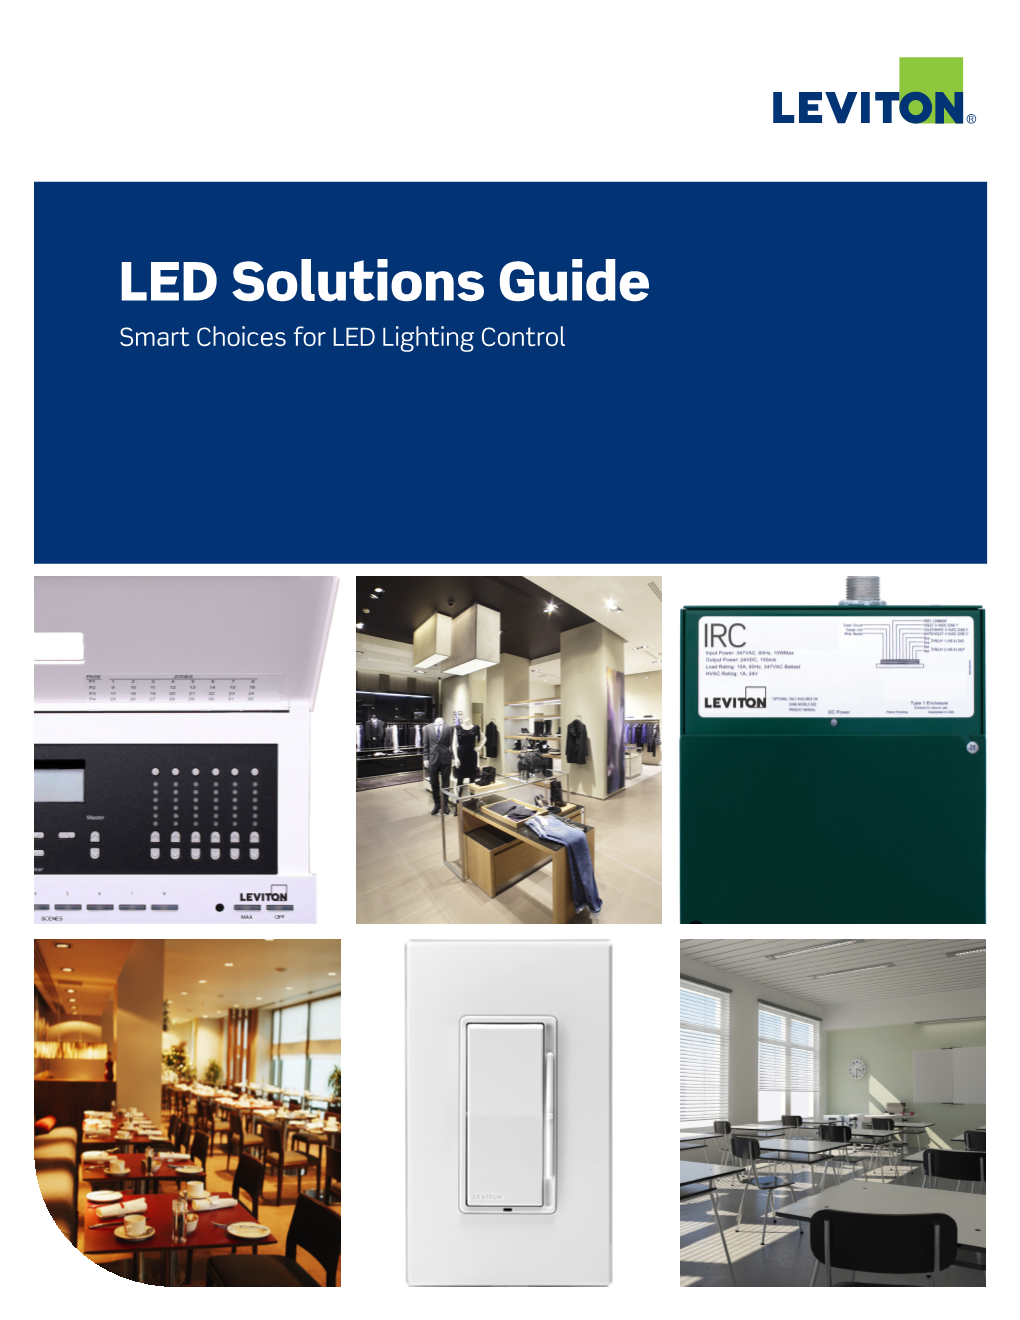 LED Solutions Guide Smart Choices for LED Lighting Control LED Lighting Is Sweeping the Industry